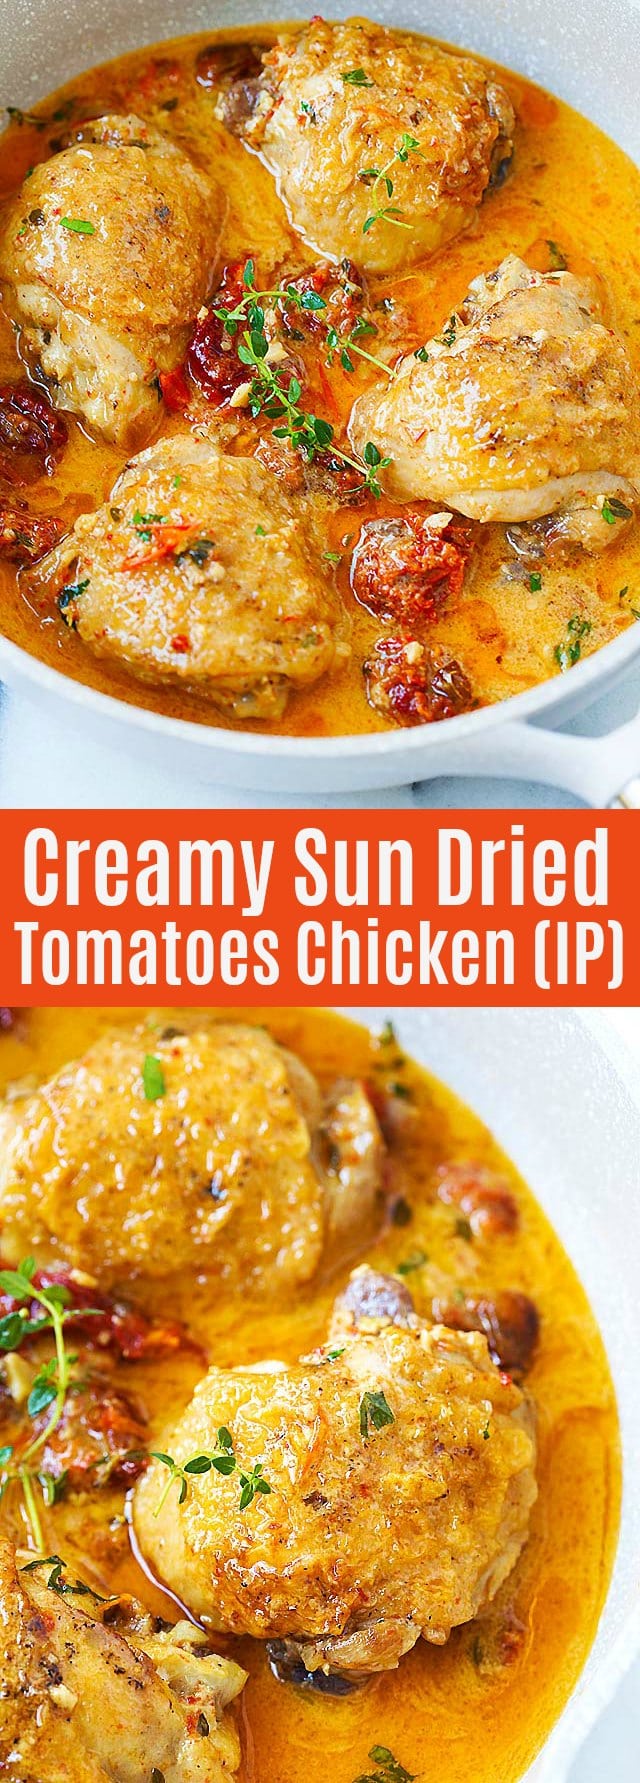 Instant Pot Creamy Sun Dried Tomatoes Chicken - tender, juicy and fall-off-the-bone Instant Pot chicken with sun dried tomatoes cream sauce. Easy dinner that takes only 20 mins!